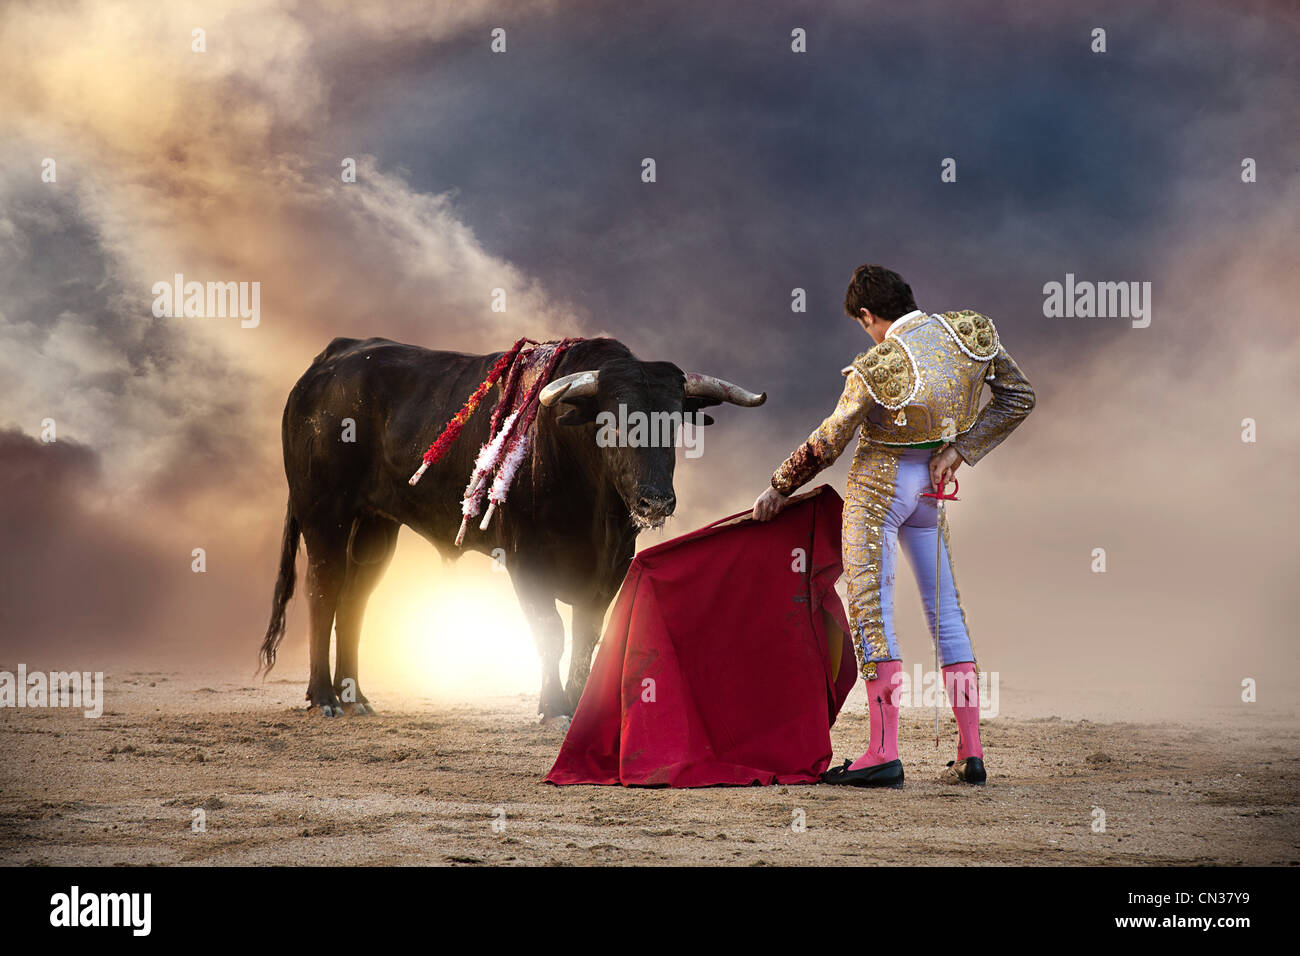 Bullfighter Holding Red Cape With Bull Las Ventas Bullring Madrid Stock Photo Alamy